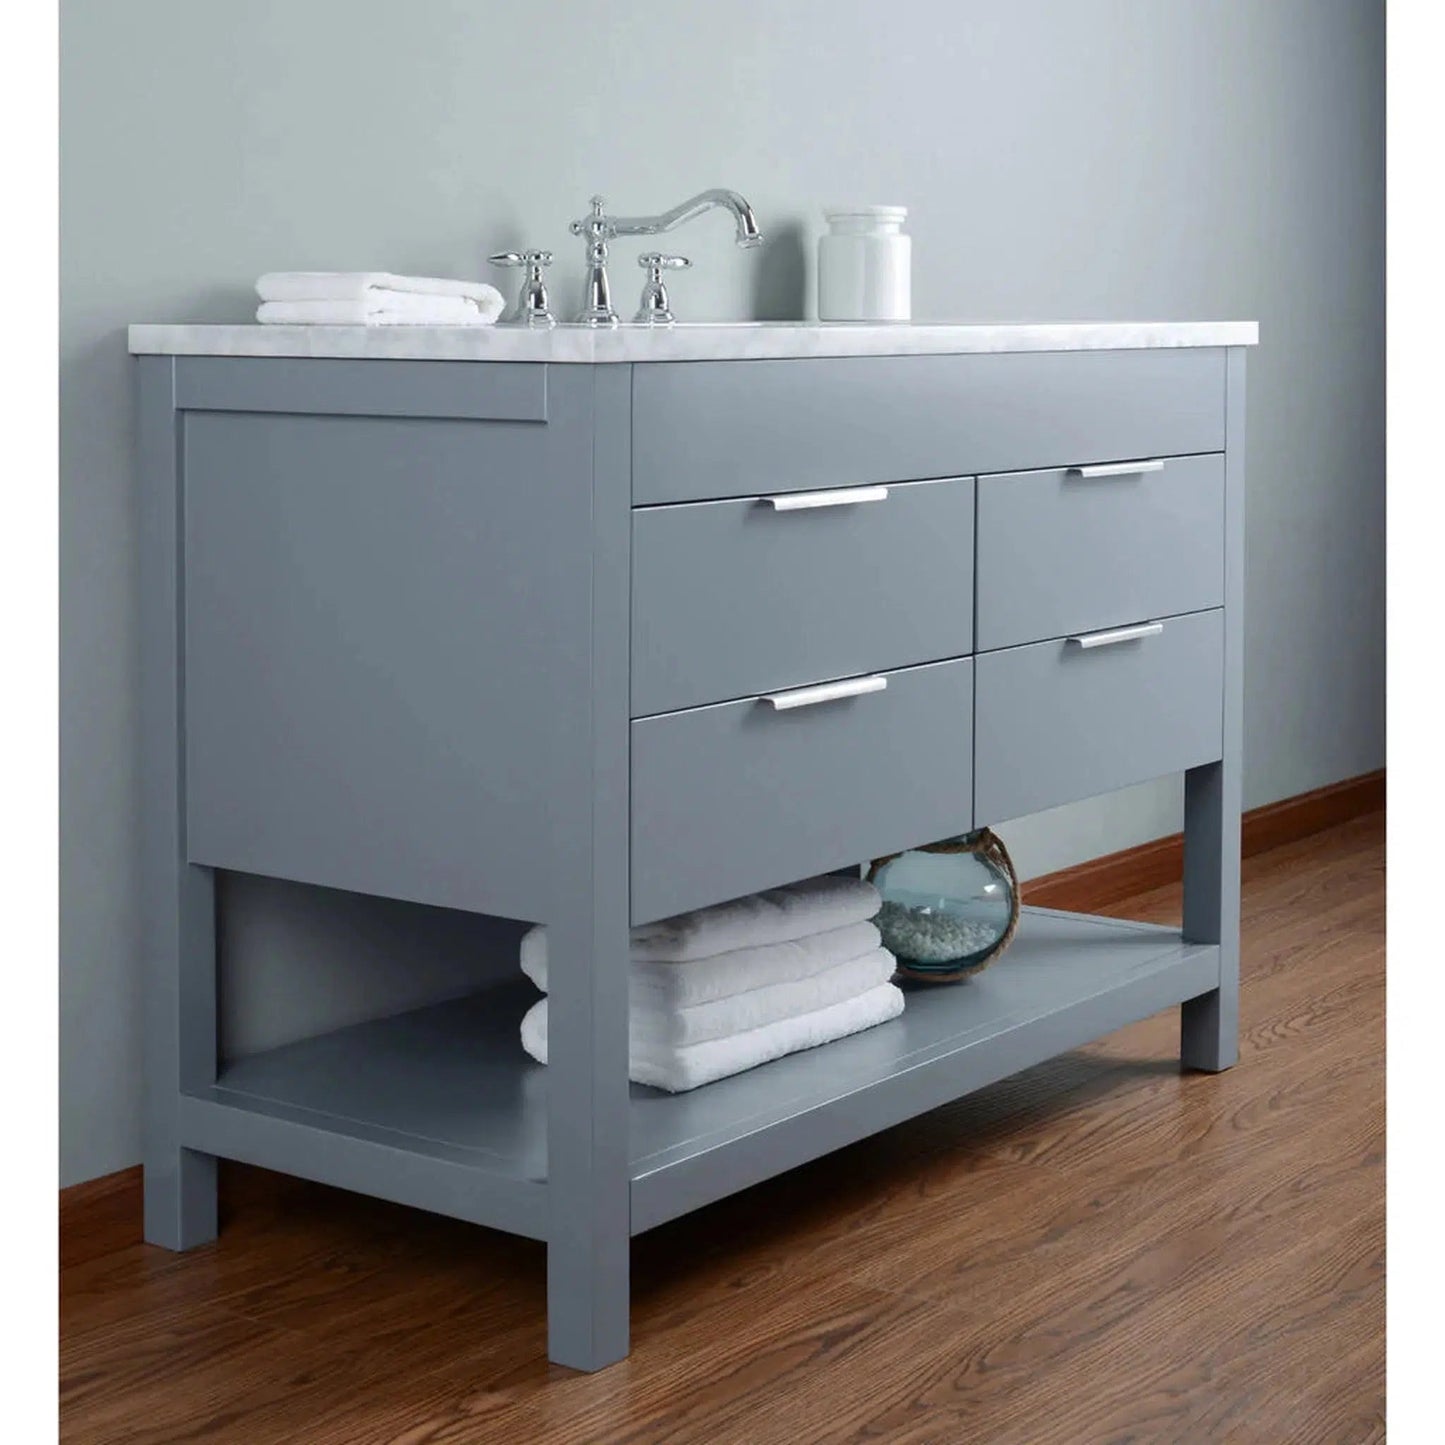 Stufurhome Rochester 48" Grey Bathroom Vanity with White Marble Countertop, Rectangular Single Sink, 4 Drawers and Widespread Faucet Holes